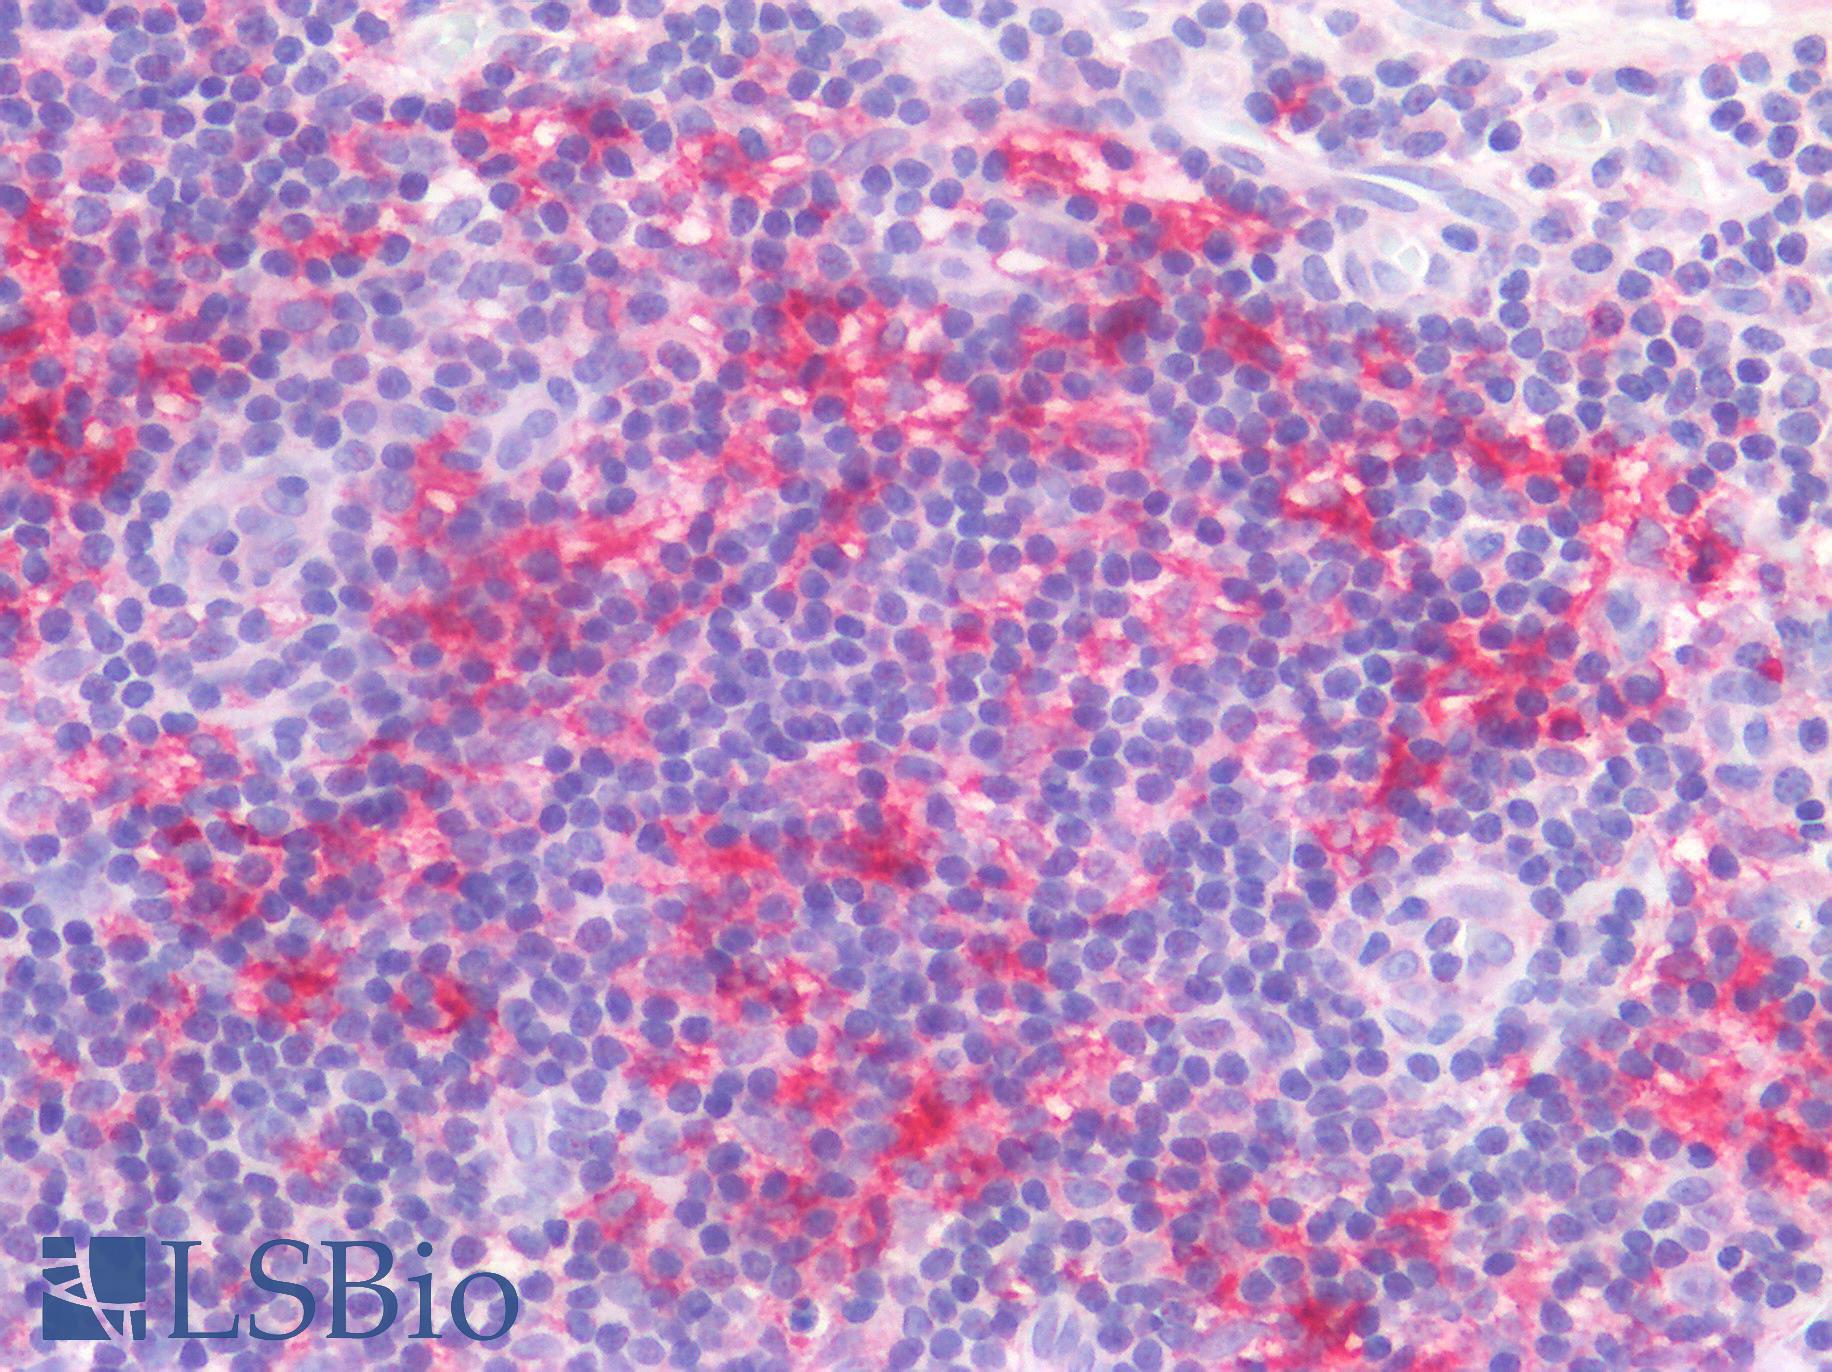 DEC-205 / CD205 / LY75 Antibody - Human Tonsil: Formalin-Fixed, Paraffin-Embedded (FFPE)